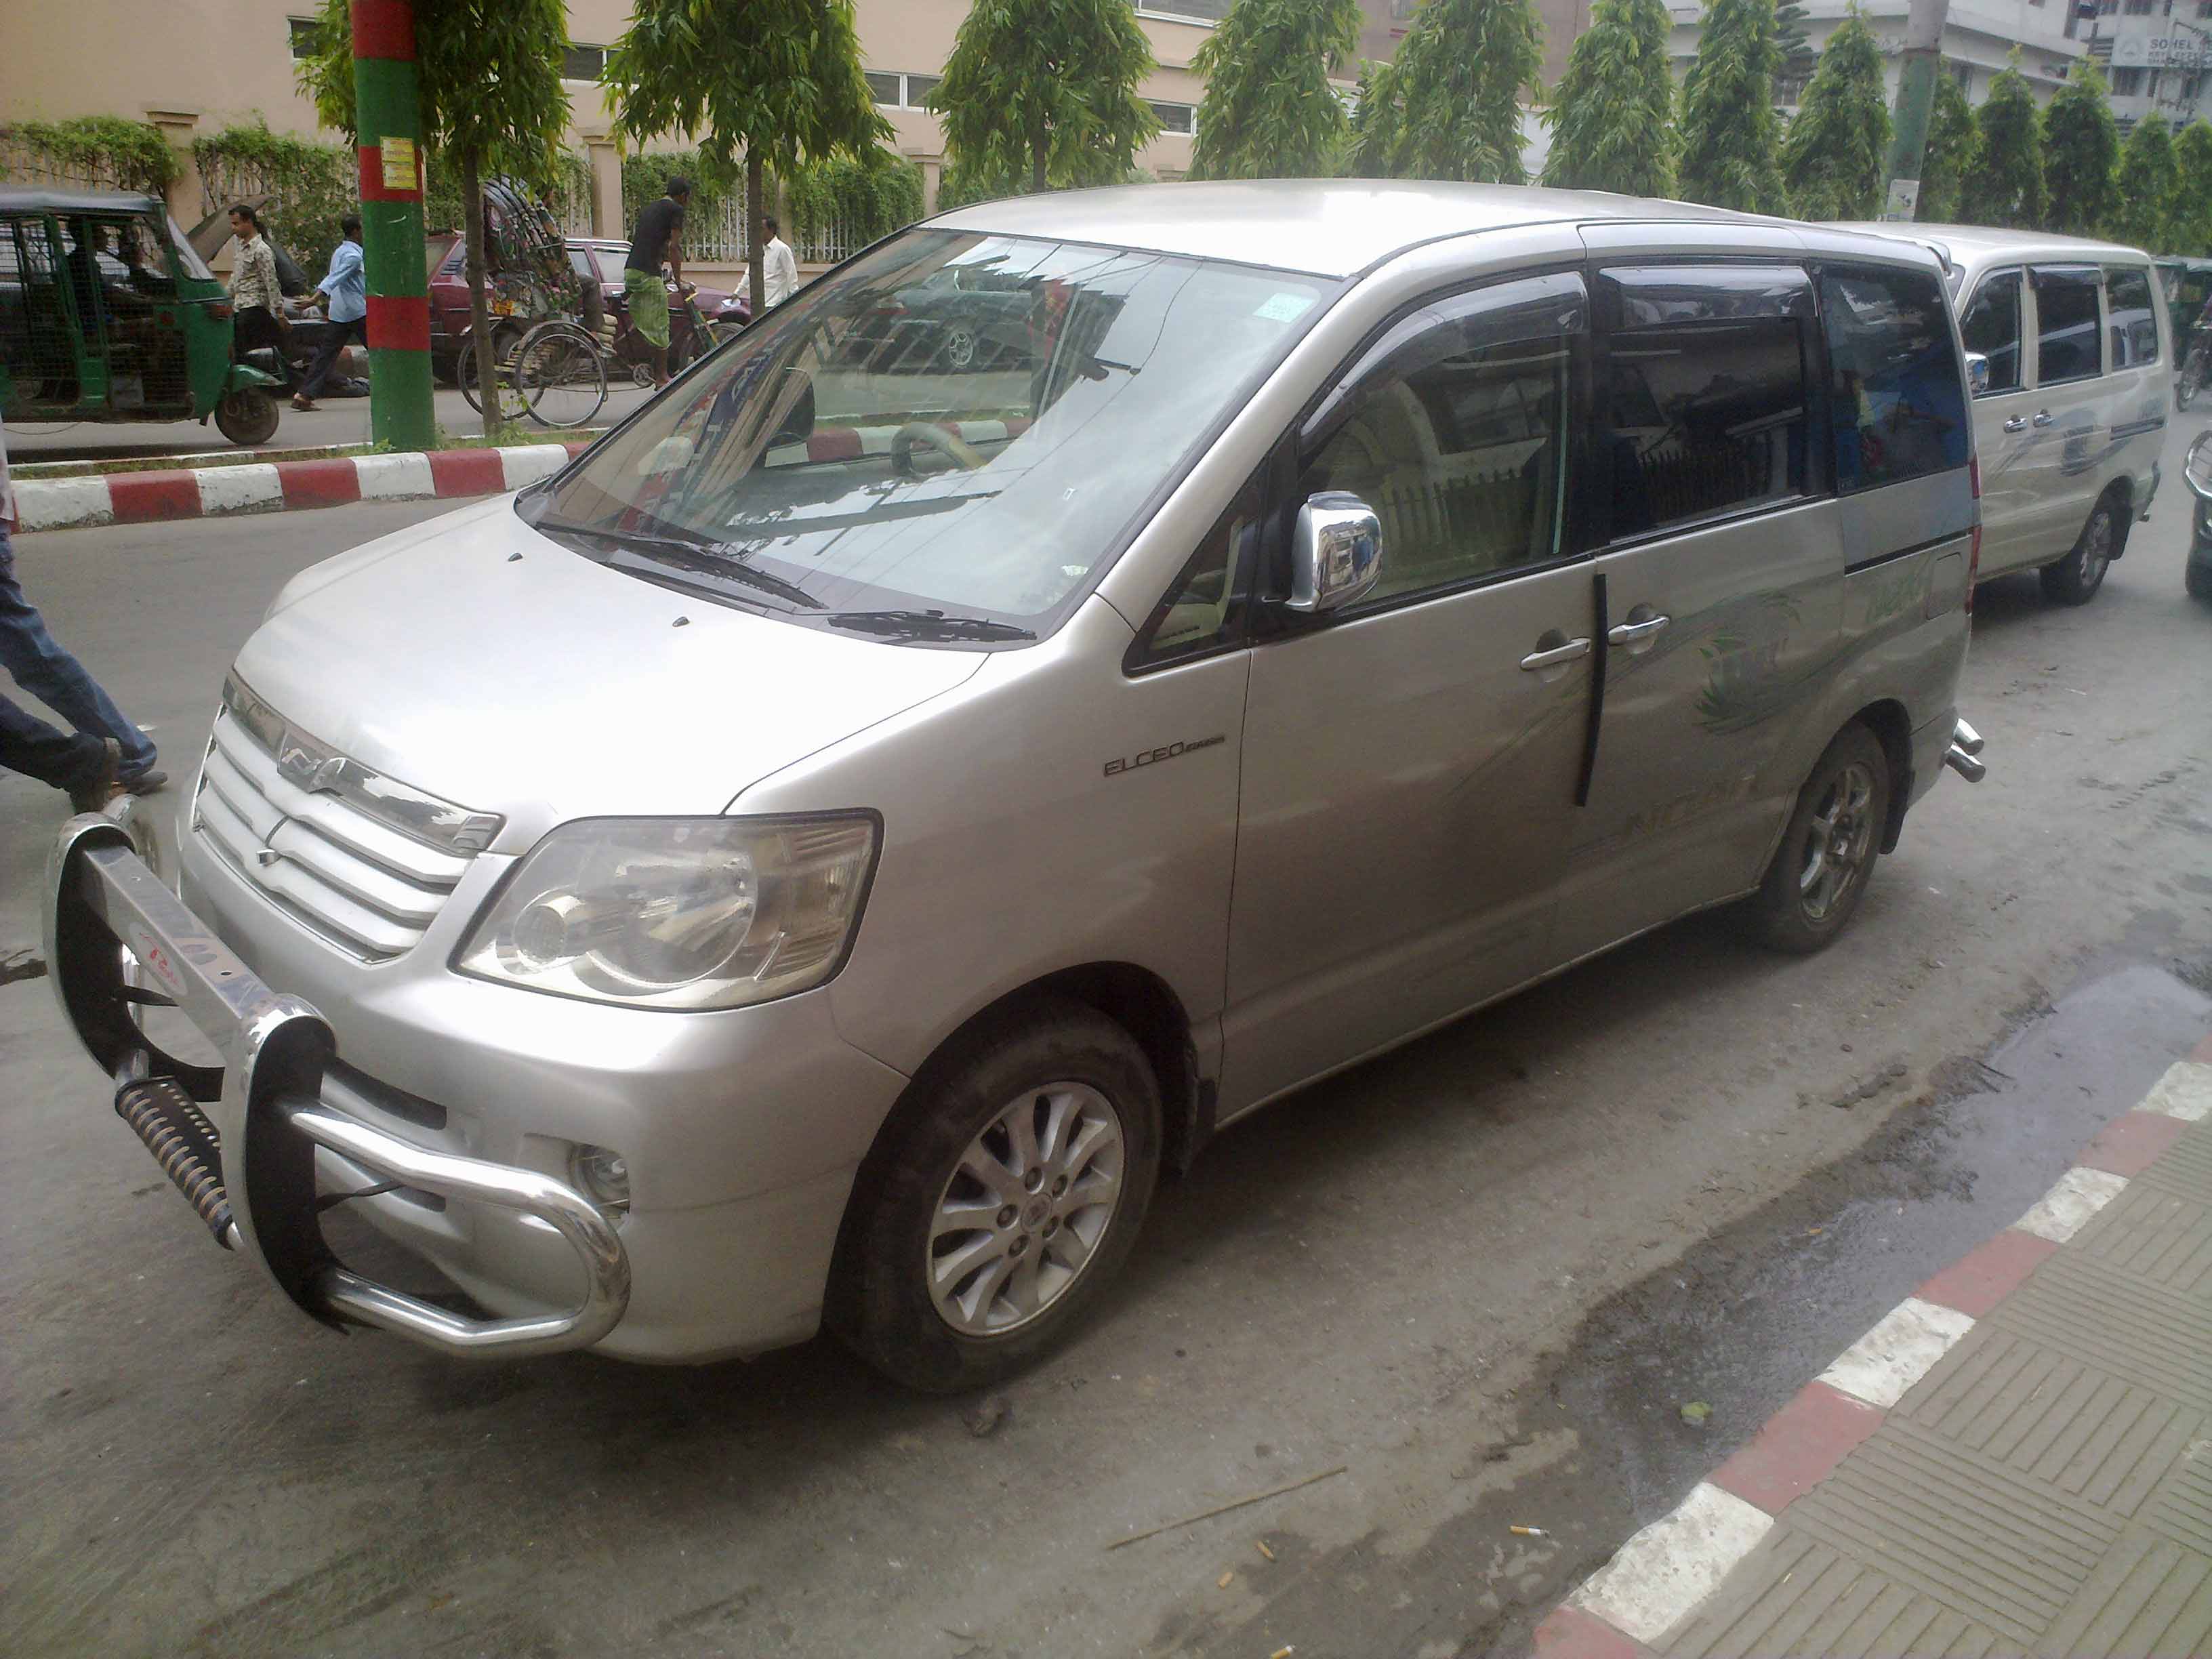 TOYOTA X-NOAH 2004 ELCEO EDITION large image 0